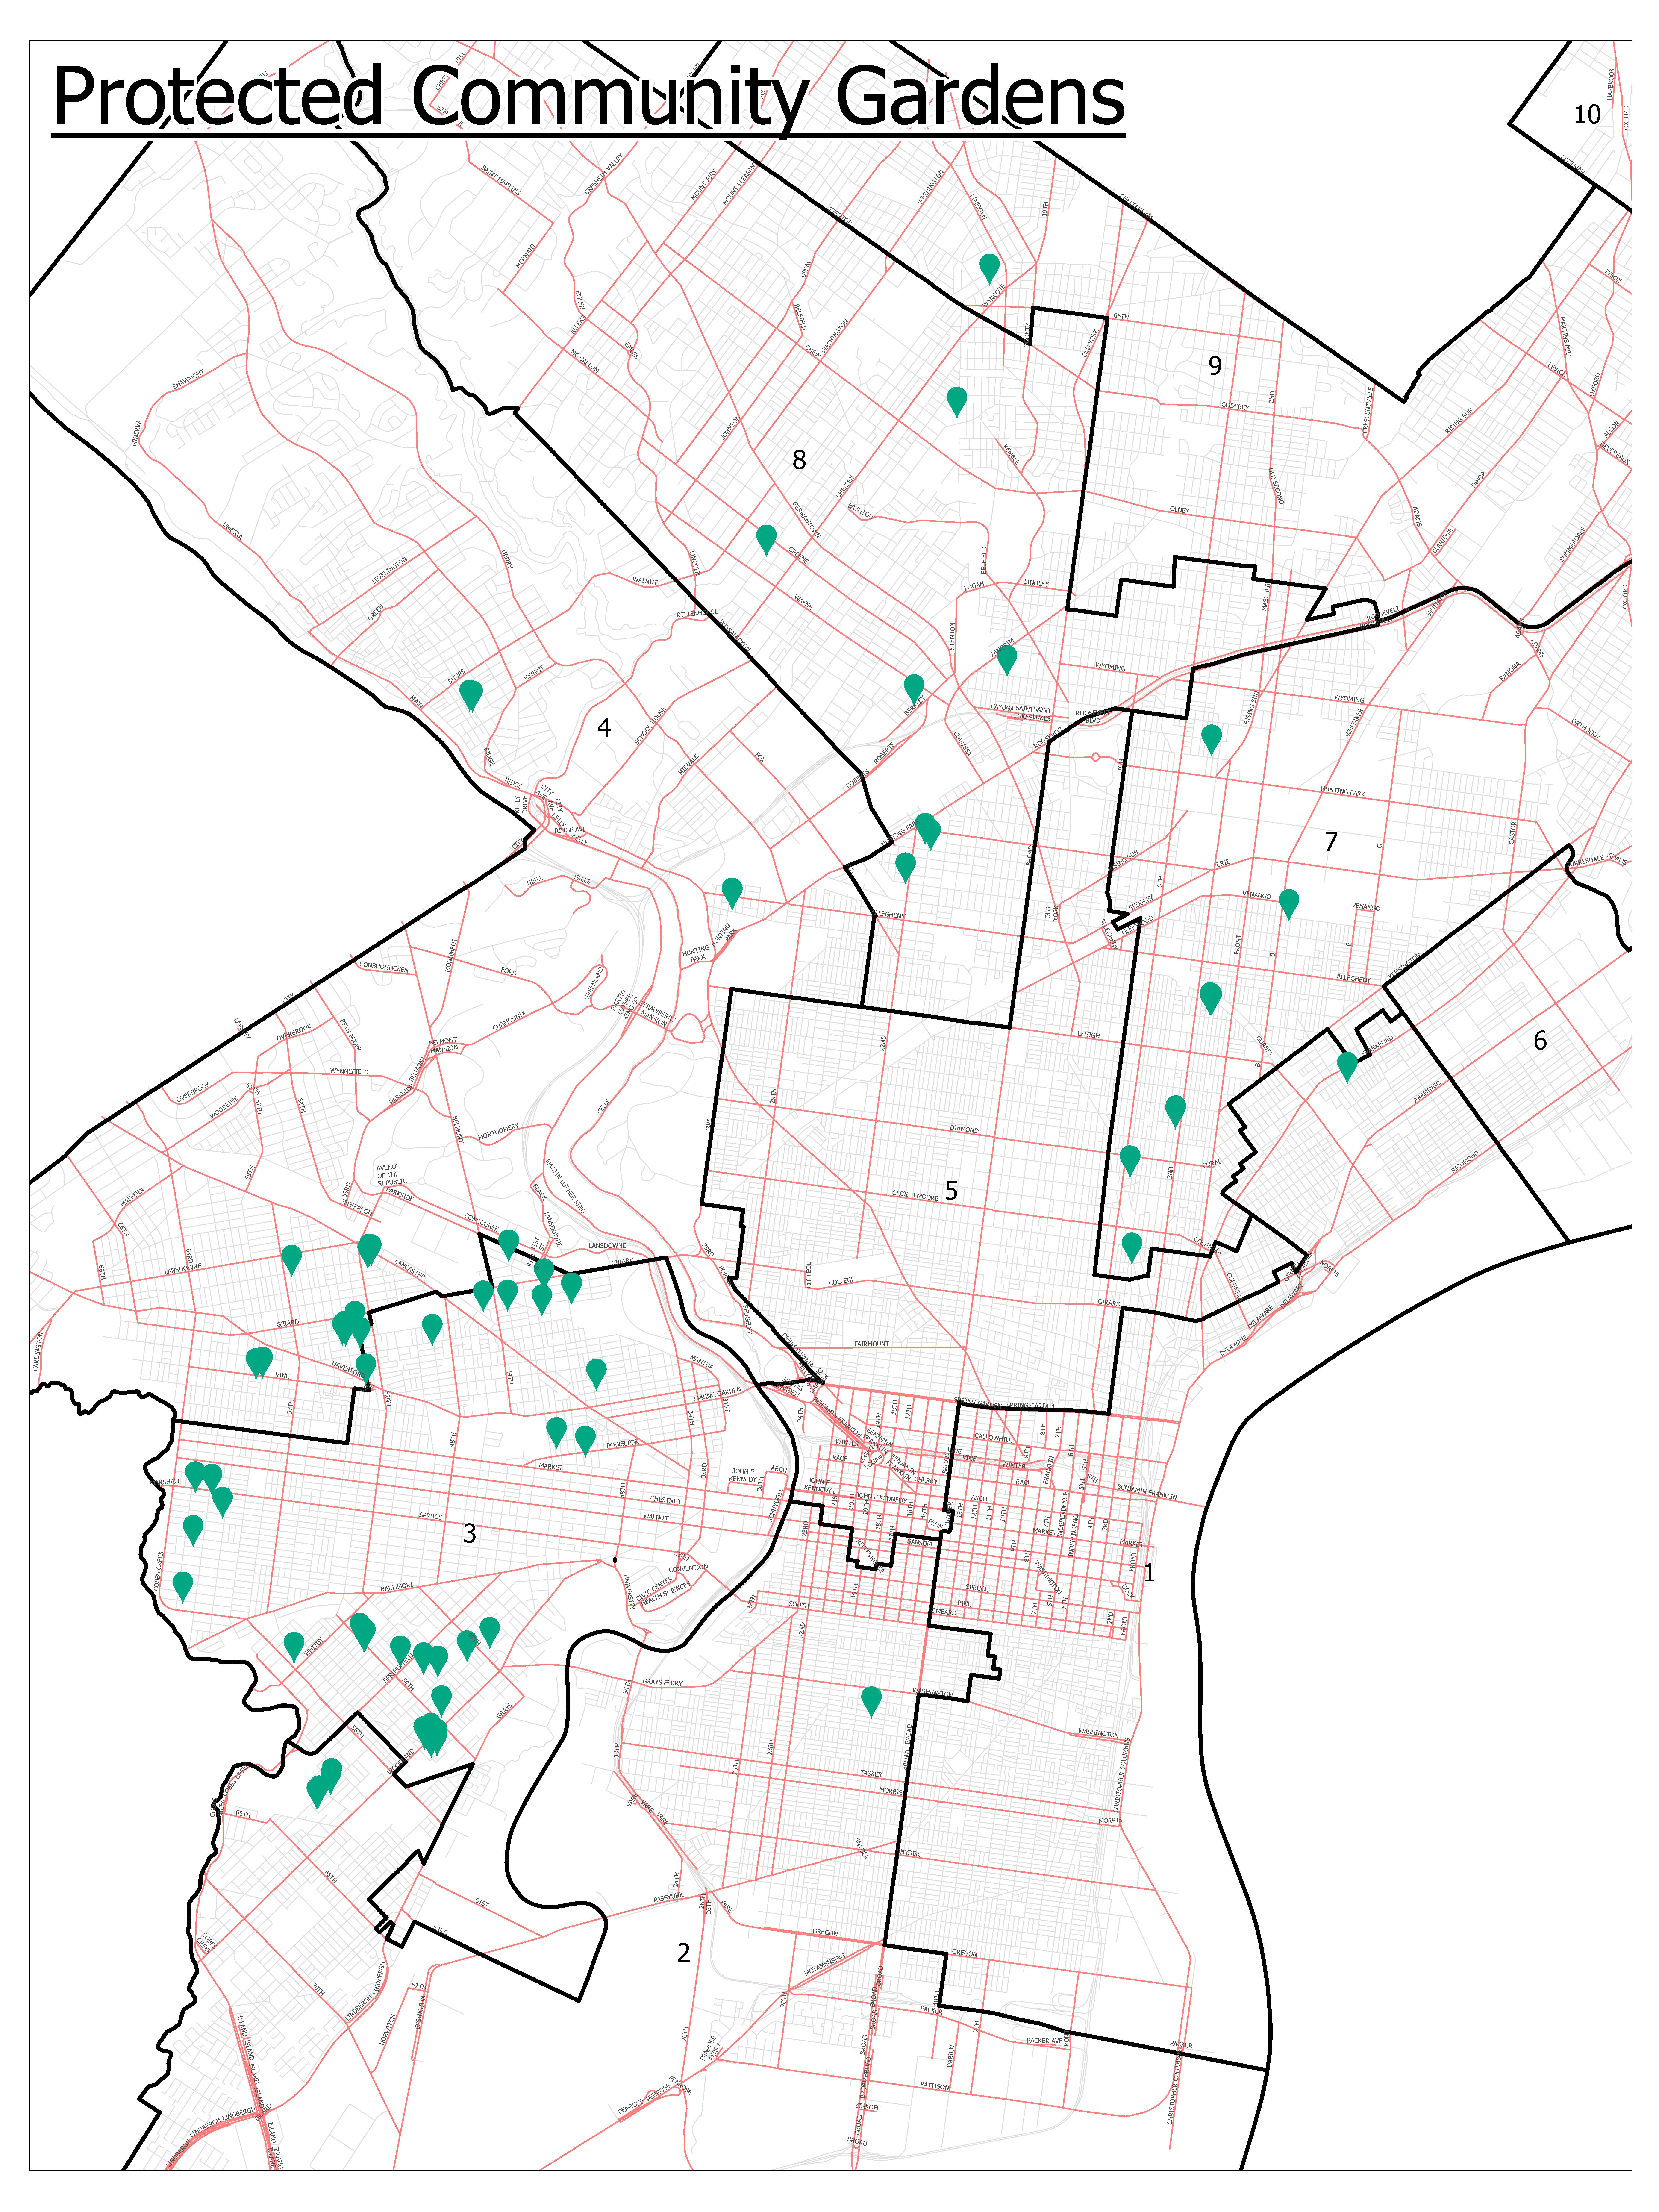 A map of the 91 gardens protected by the City's acquisition of U.S. Bank liens